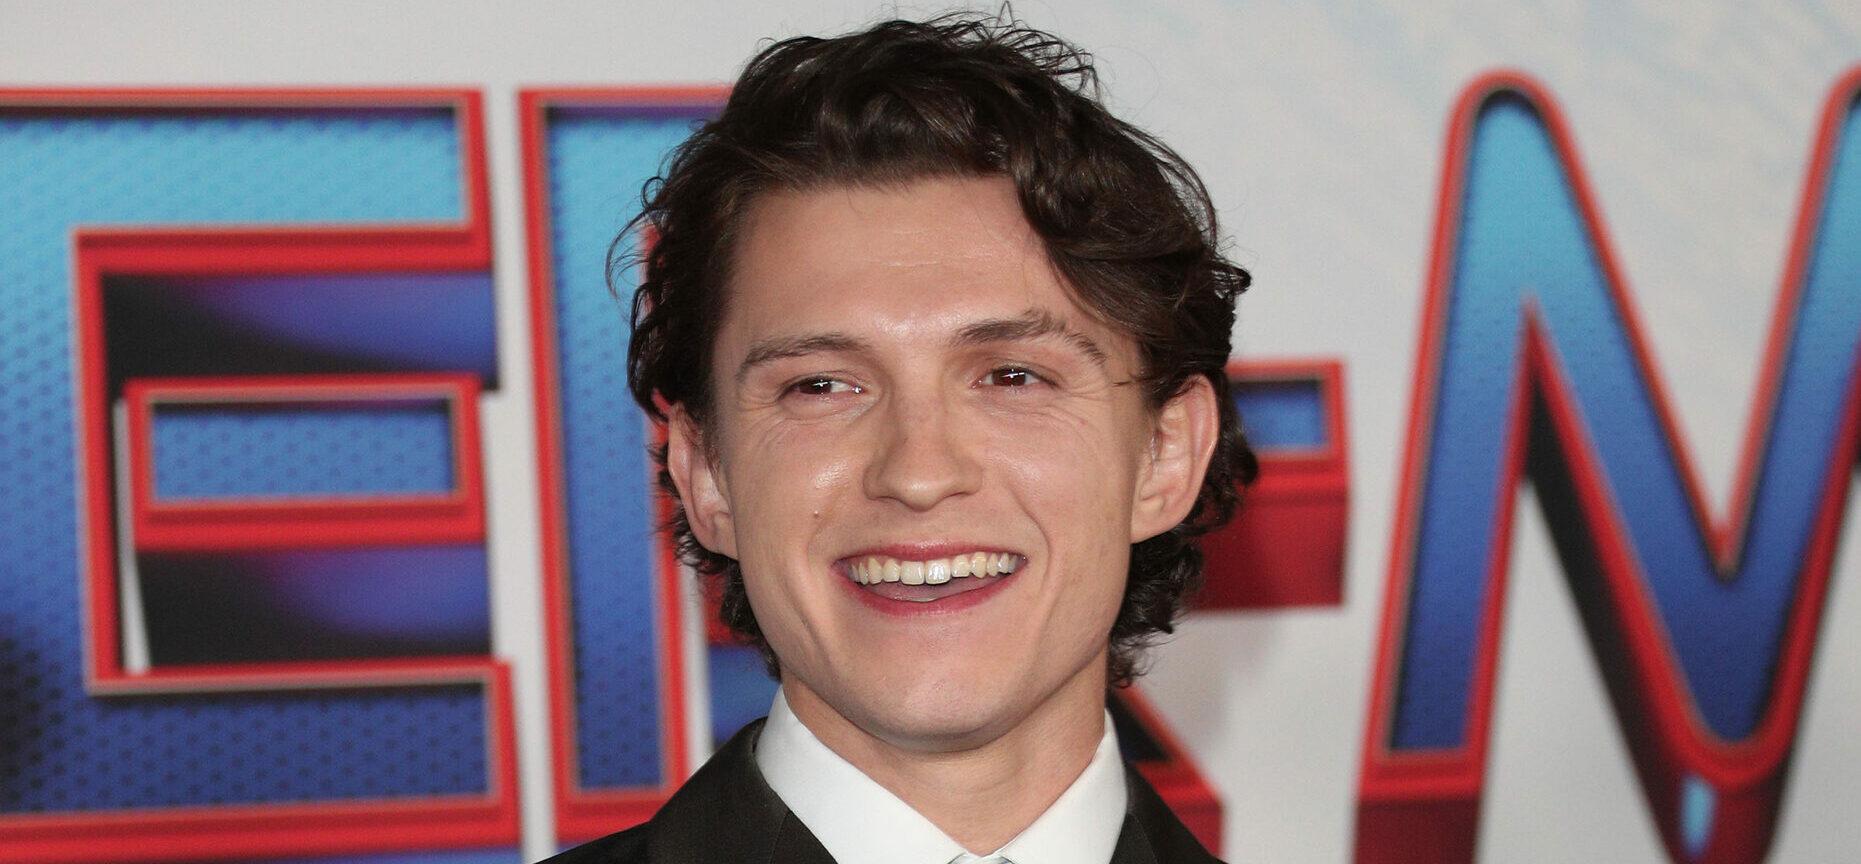 Tom Holland at the Spider-Man: No Way Home